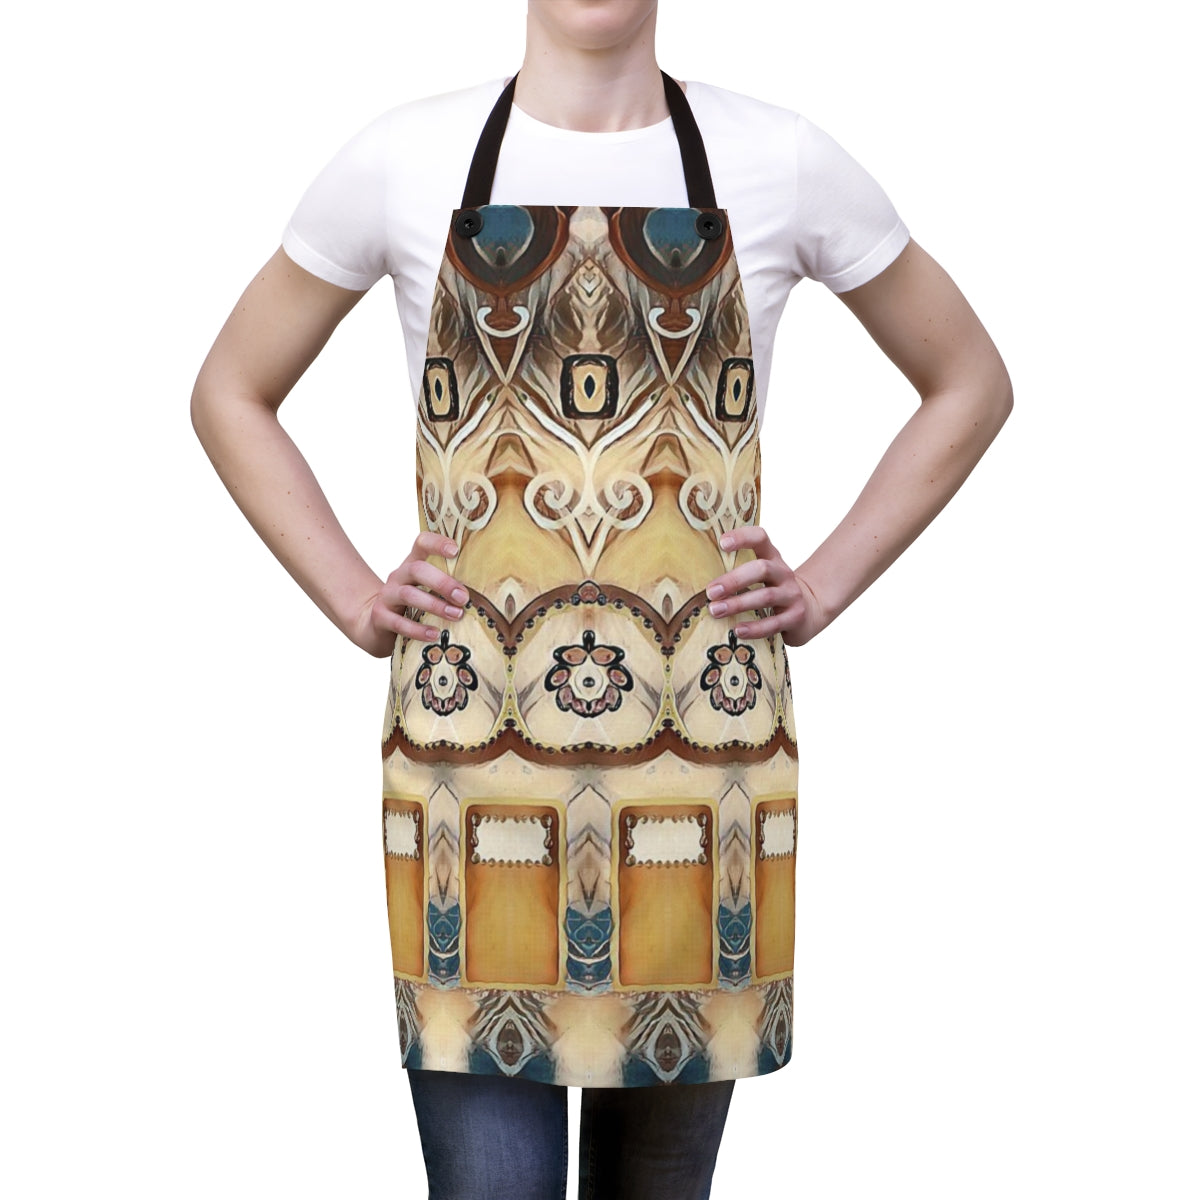 ain't my first rodeo designer style apron